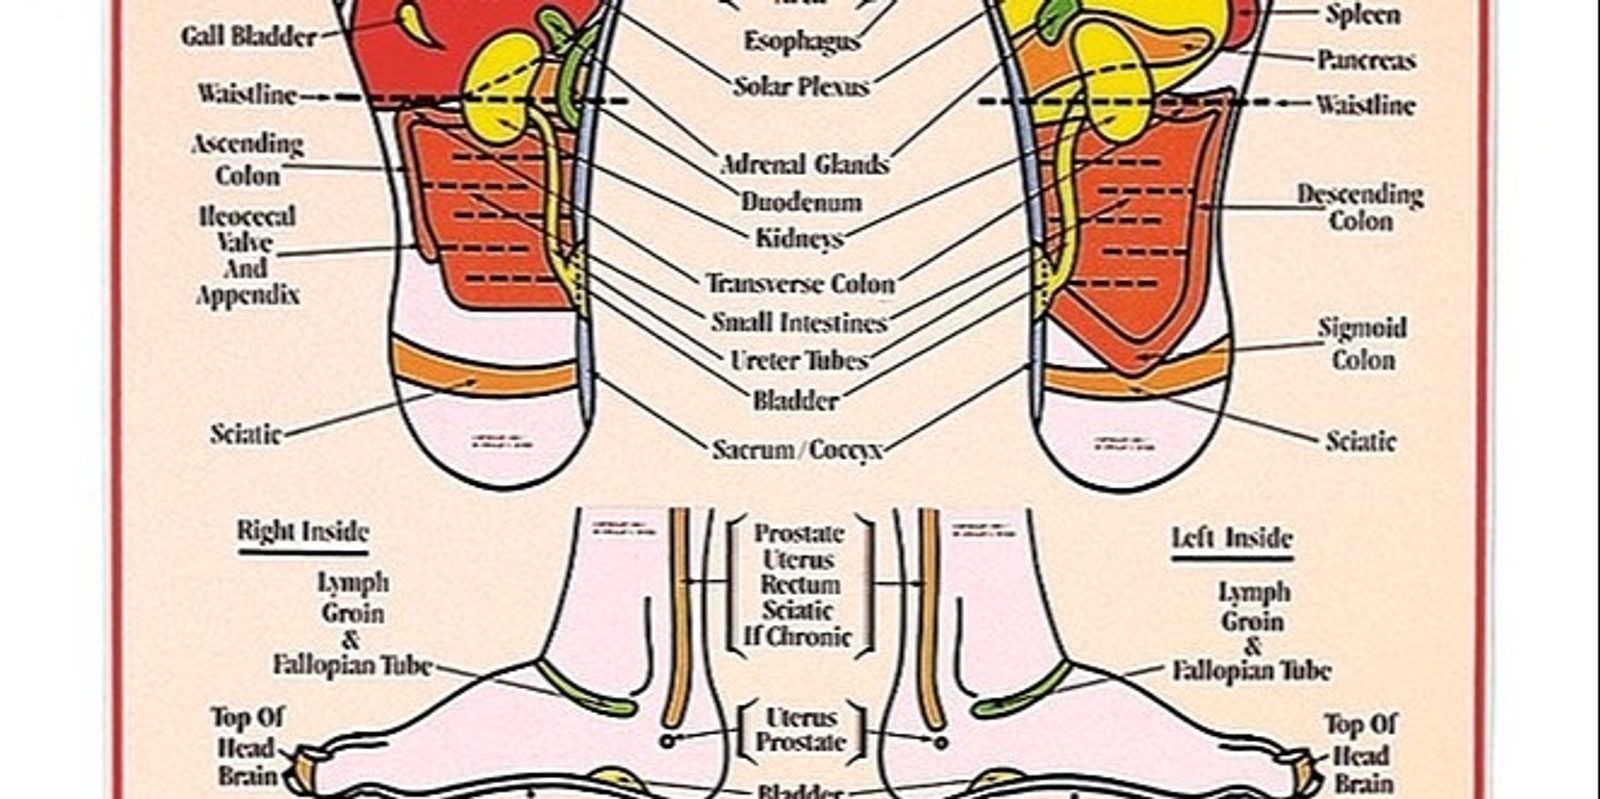 Reflexology for family and friends